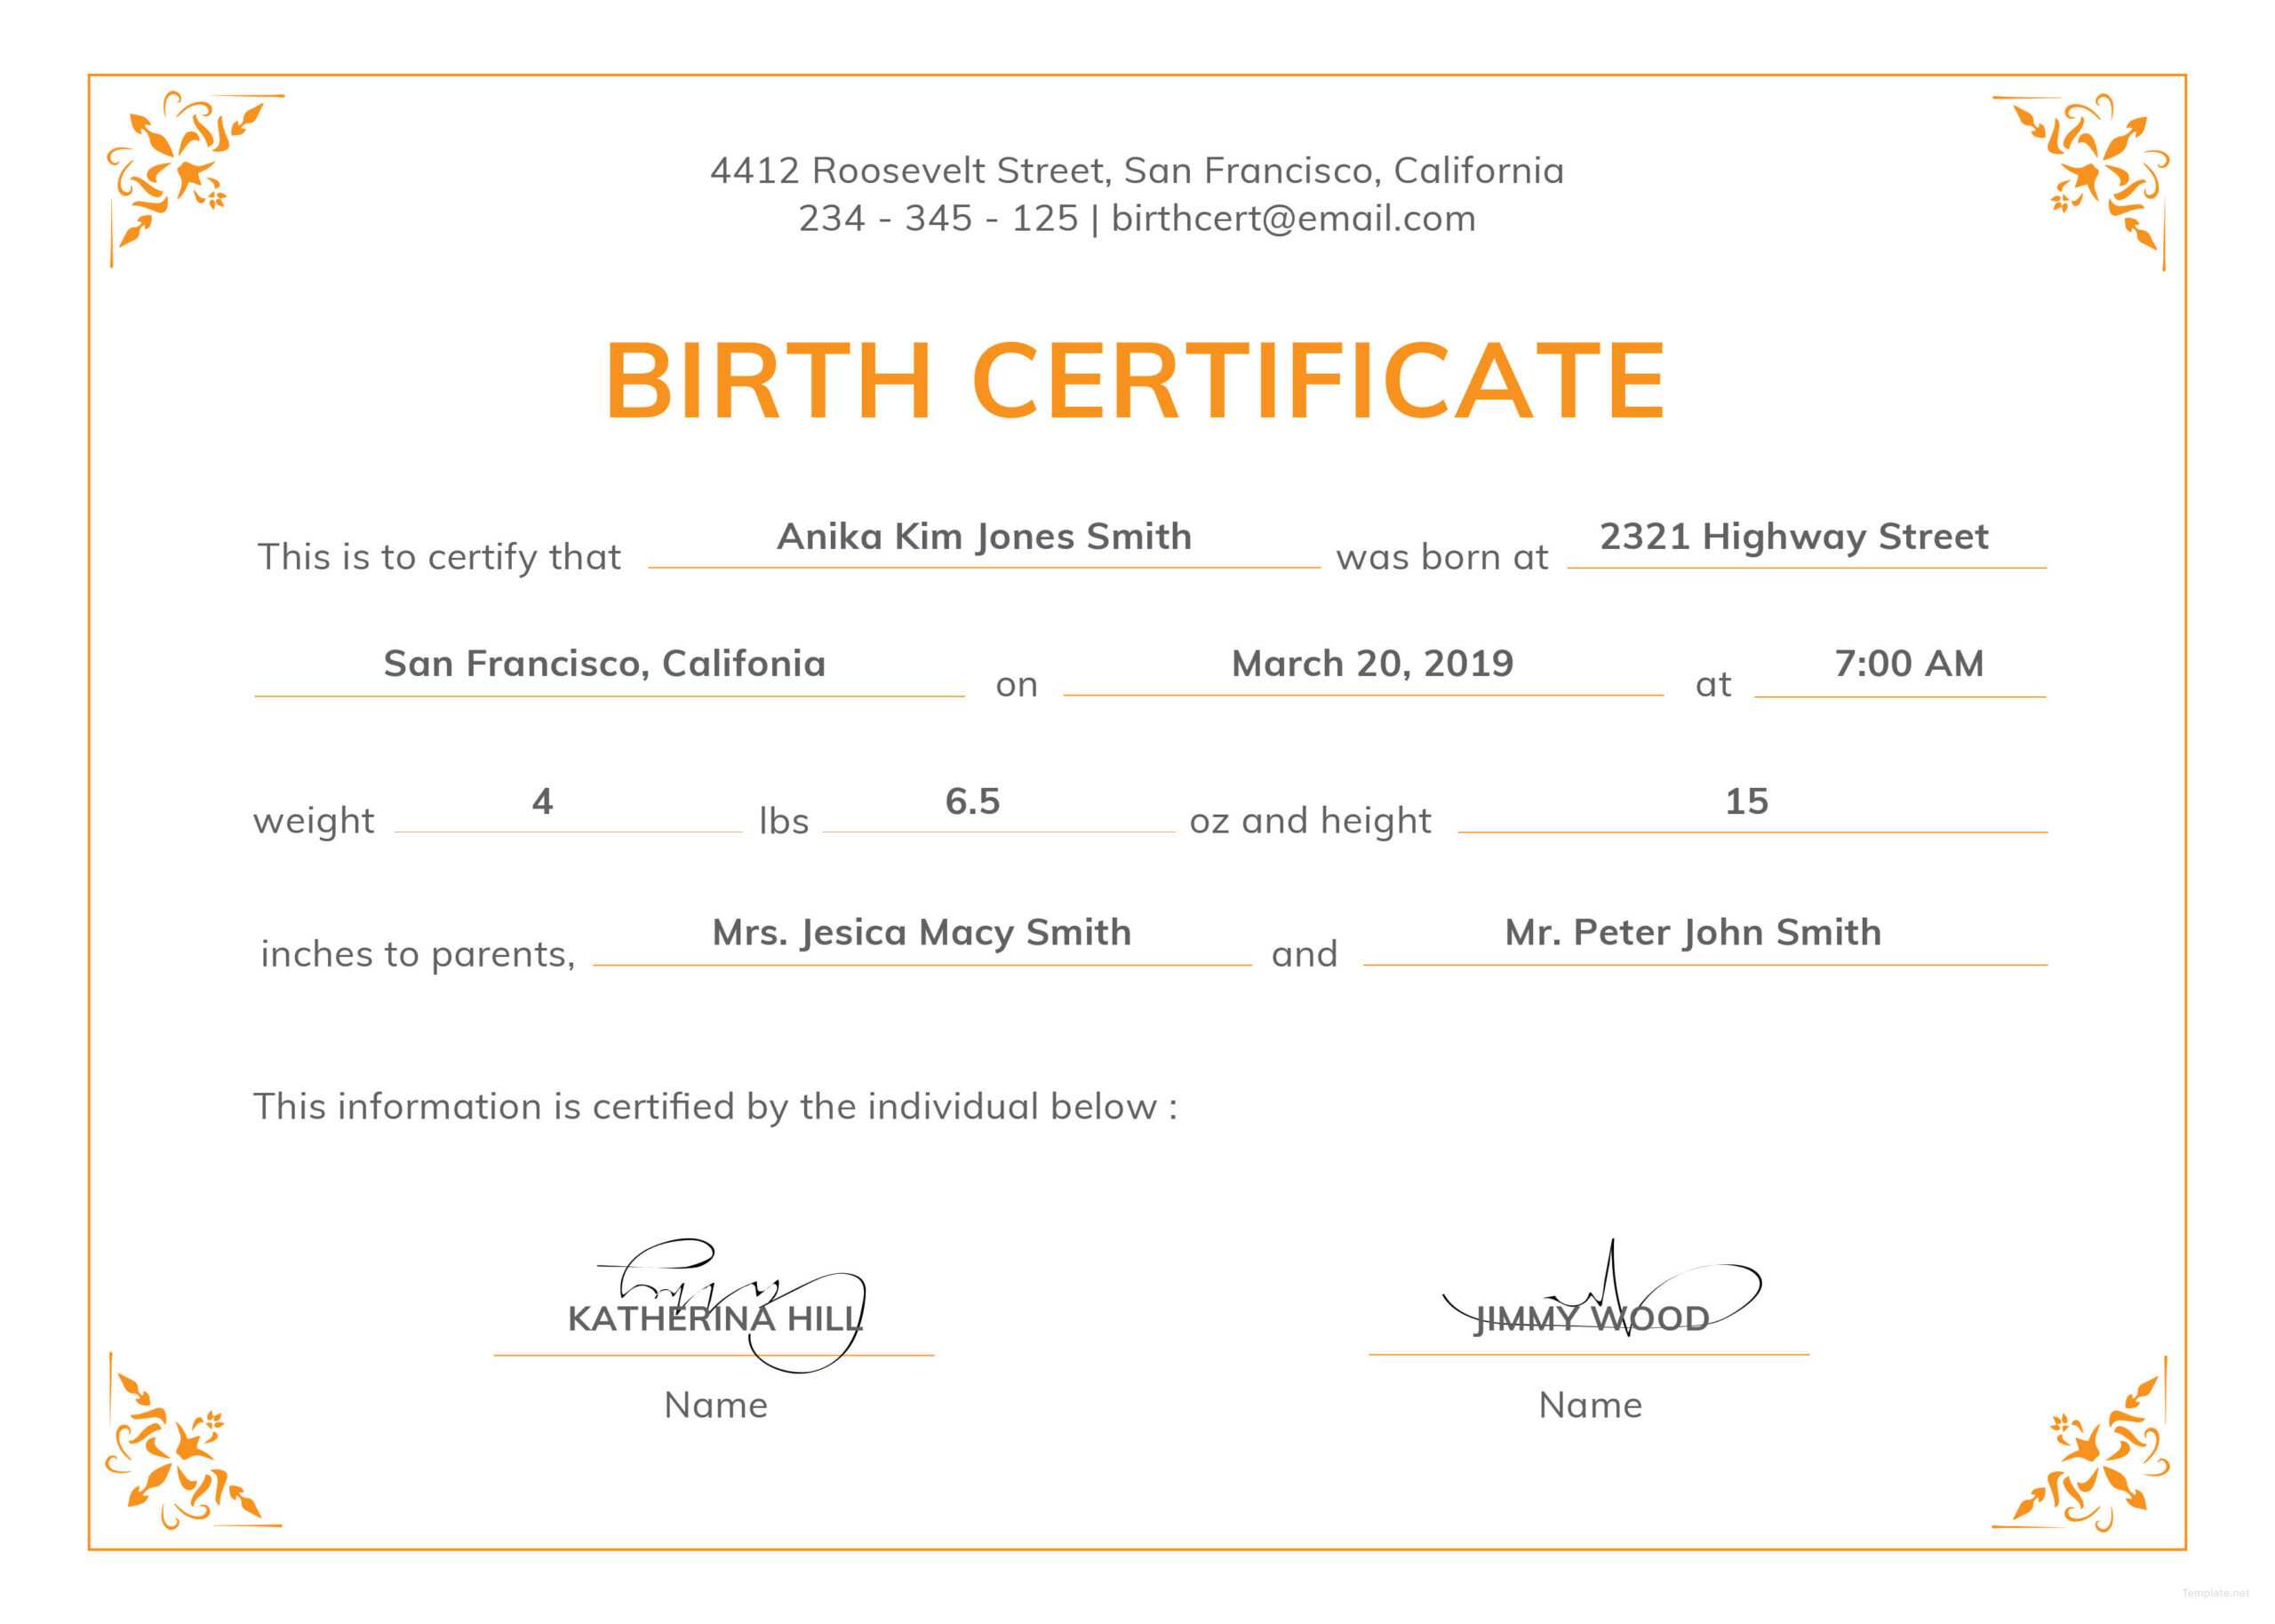 Can Make A Delivery Certificate Crucial | Gift Certificate Intended For Birth Certificate Template Uk